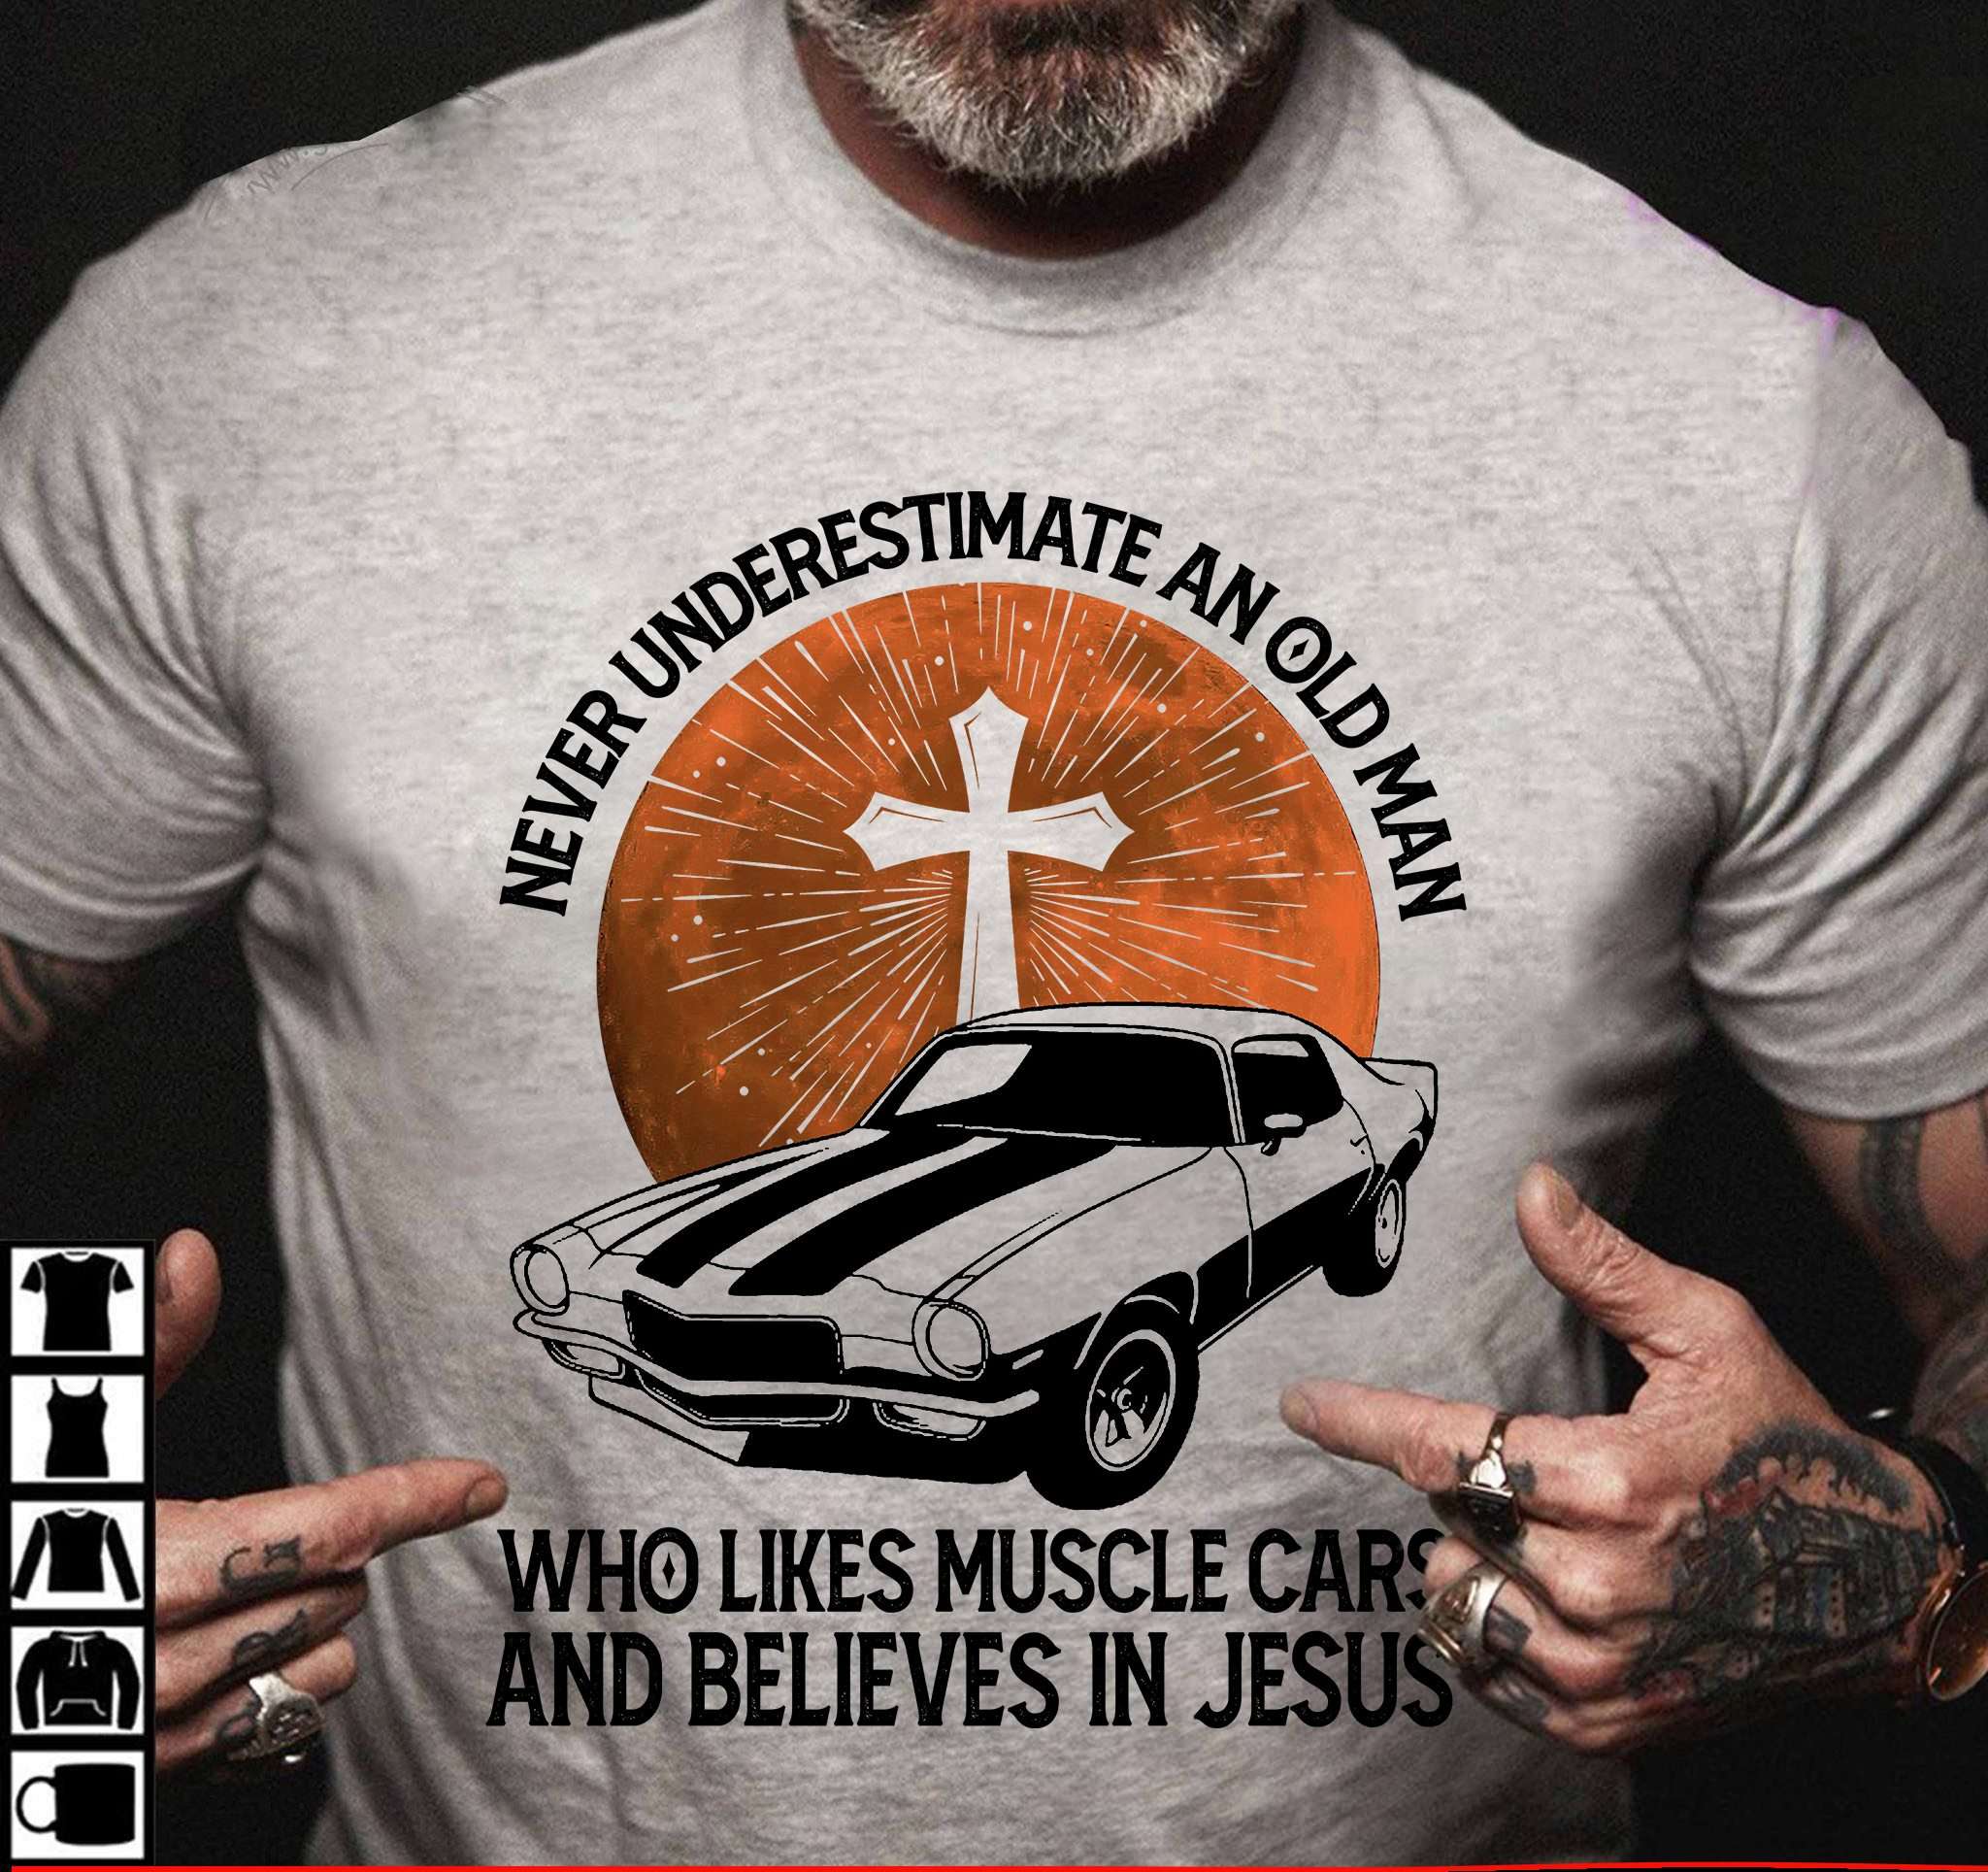 Never underestimate an old man who likes muscle cars and believe in Jesus - Jesus and muscle cars